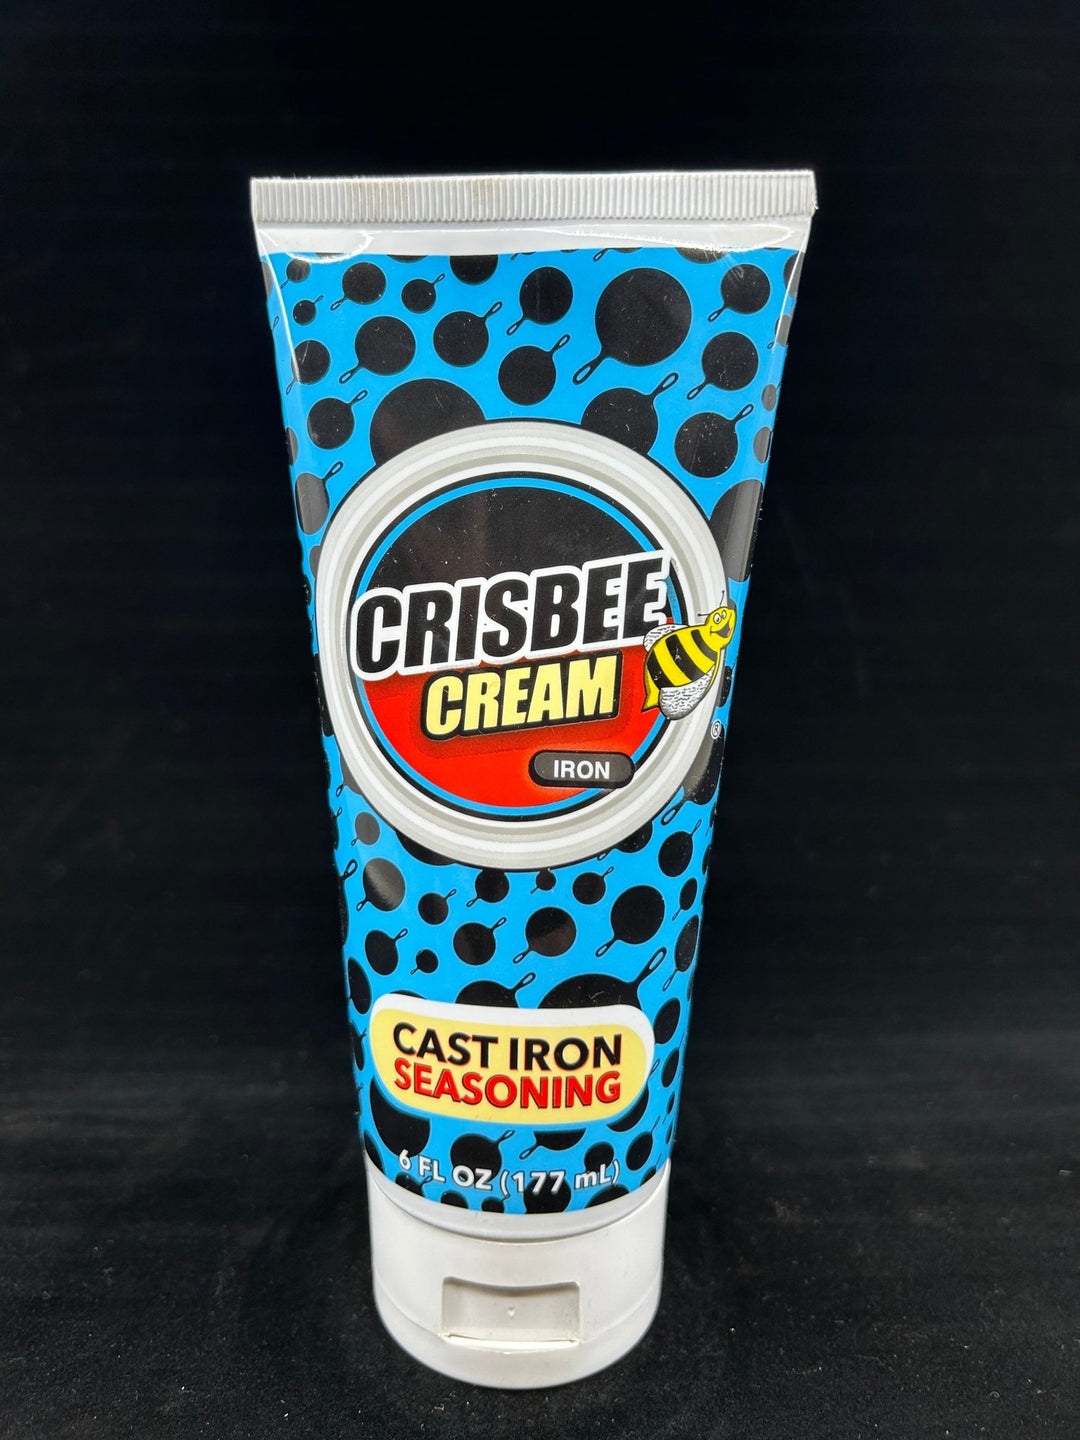 Crisbee Griddle and Smoker Seasoning Cream | Easy, Non-Stick Seasoning for  All Your Cooking Needs